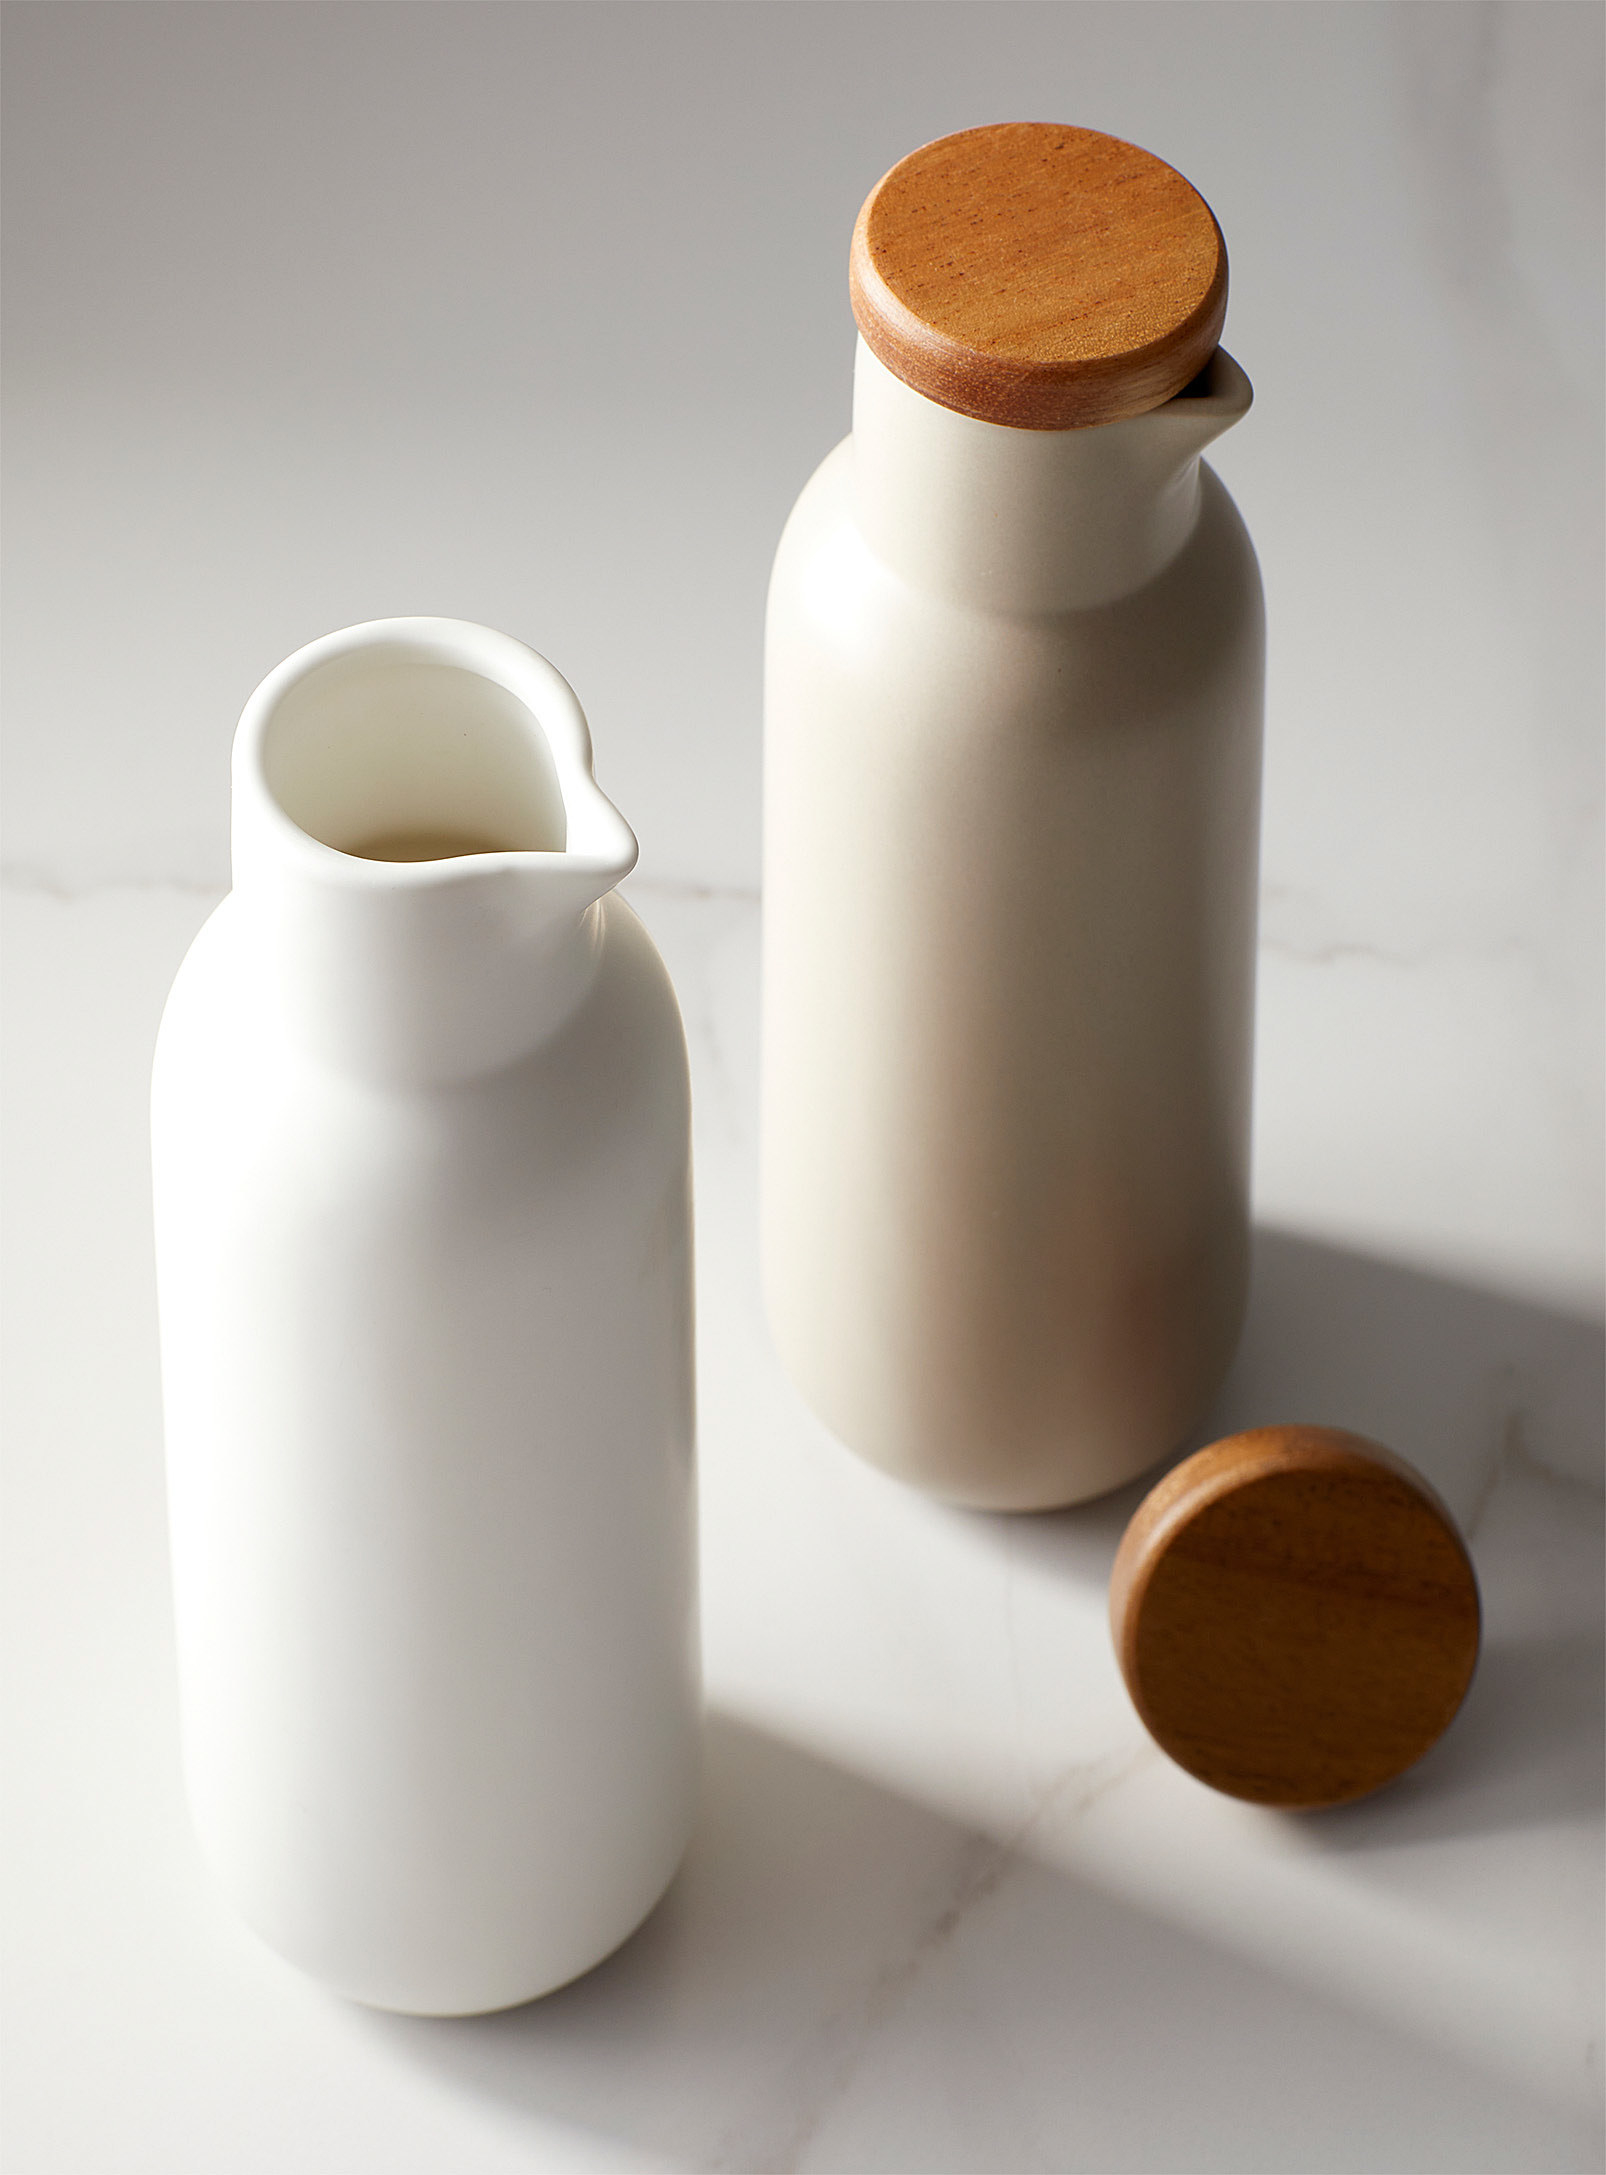 The two bottle on a marble counter, one has its lid off